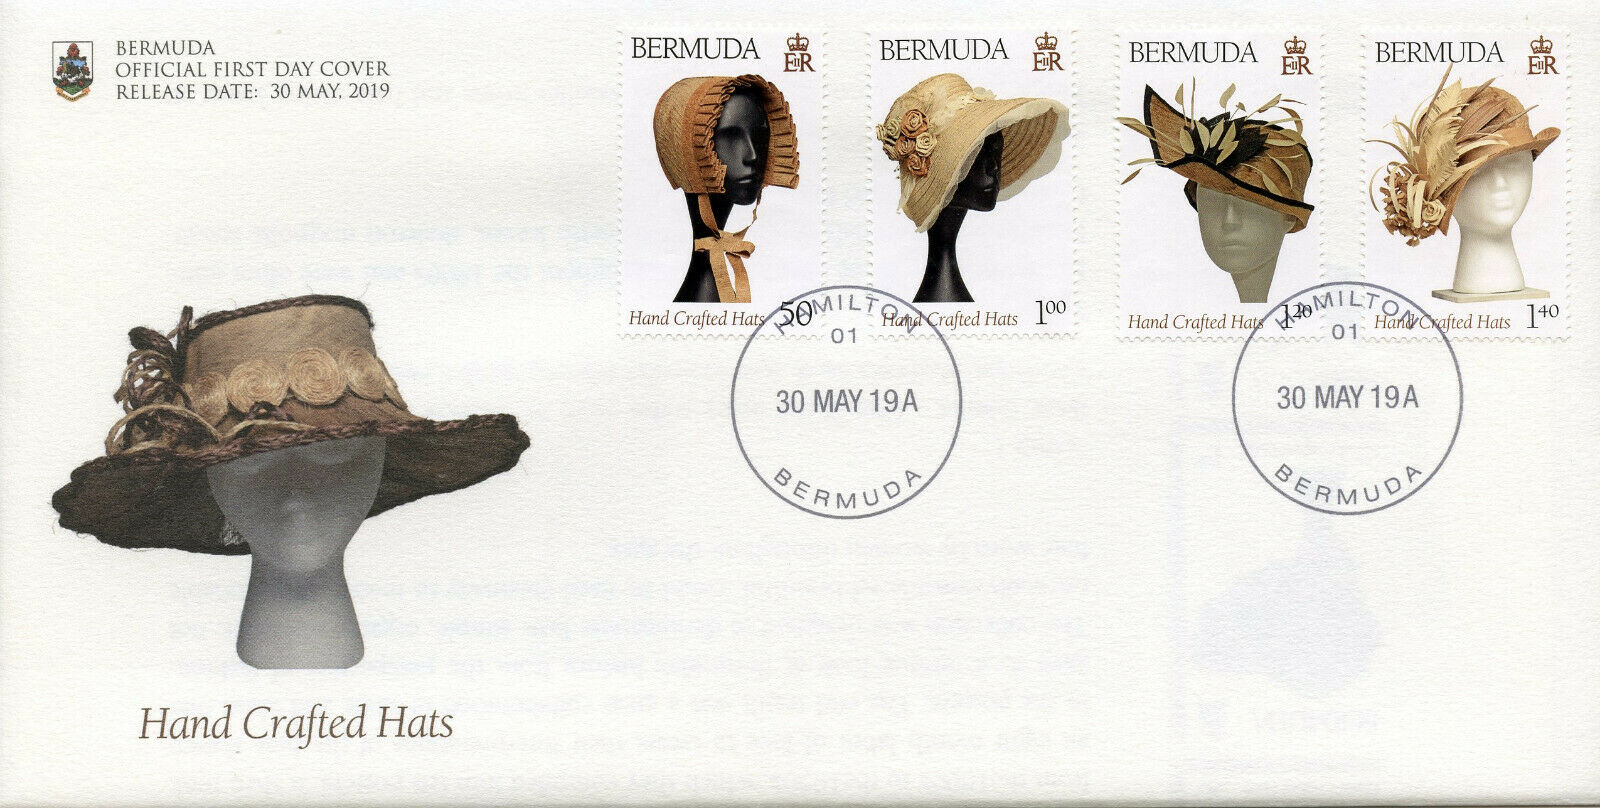 Bermuda 2019 FDC Fashion Stamps Hand Crafted Hats Cultures Traditions 4v Set